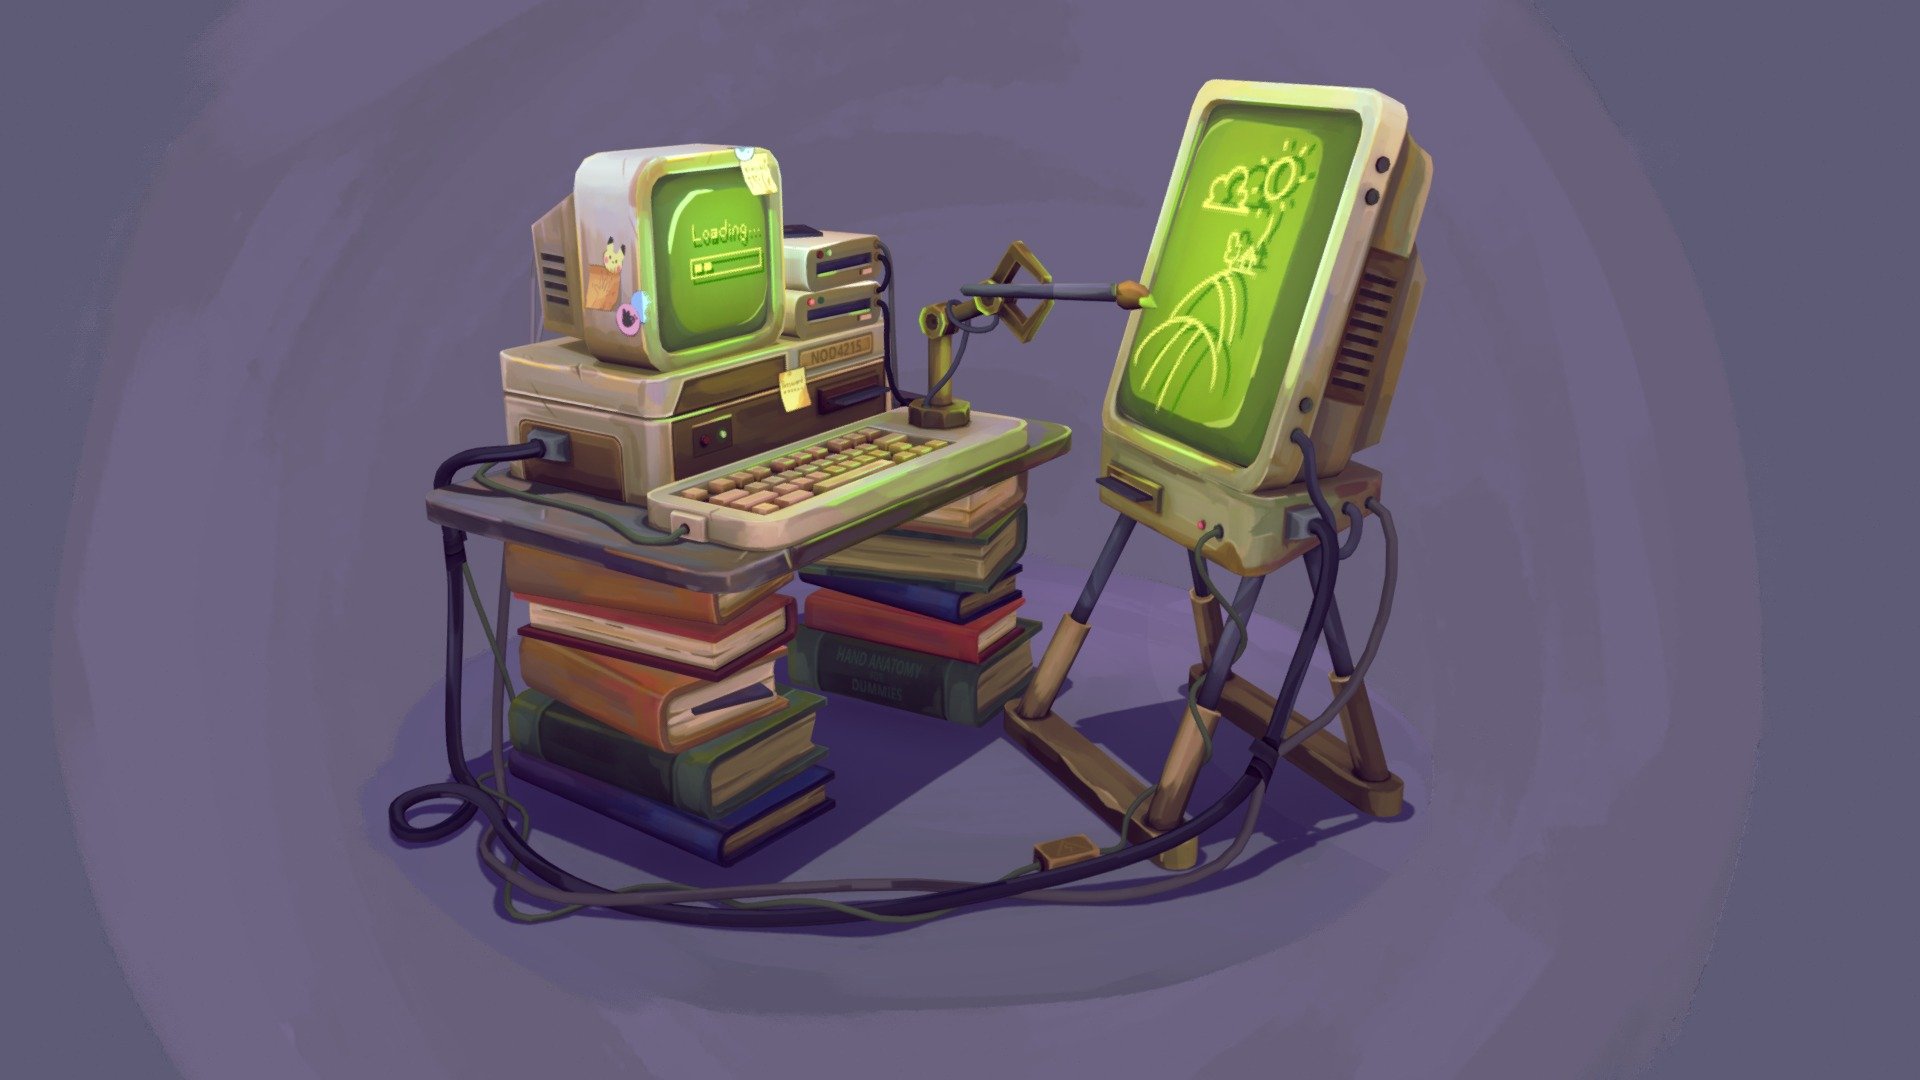 Artstation post: https://www.artstation.com/artwork/xDdLzY

This is my project for the fourth week of the CGMA Stylized Game Assets course,
with some guidance from Ashleigh Warner.

The main focus of the project was to create a 3D model of a Retro Sci-Fi computer. 
The main inspiration behind this project was the possibility of using AI to generate art 3d model